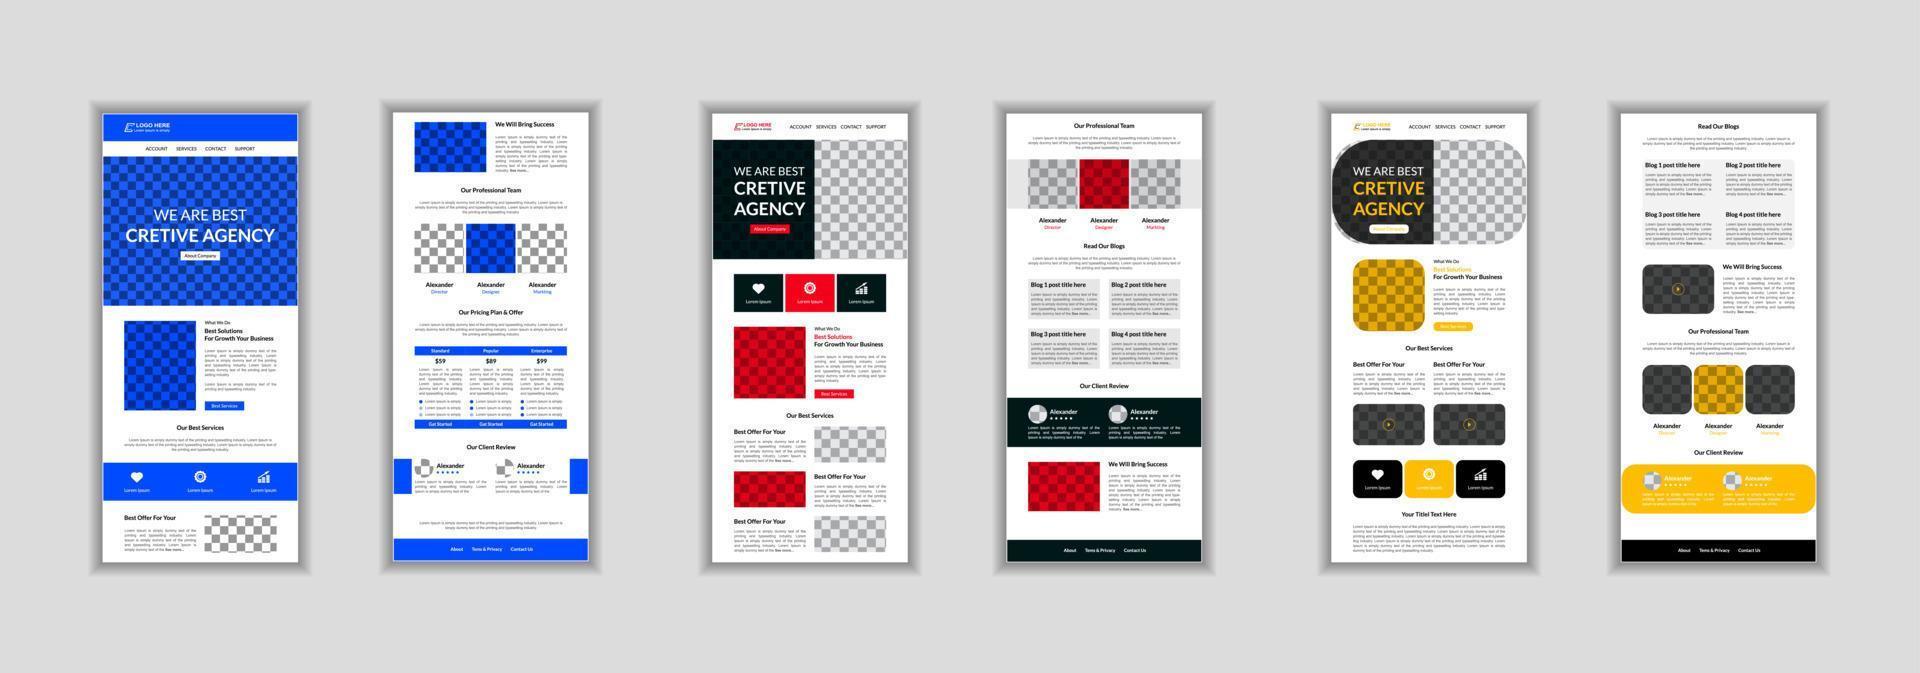 Business or creative agency email newsletter template or Minimal Marketing e-commerce UI template and business roll up banner design vector